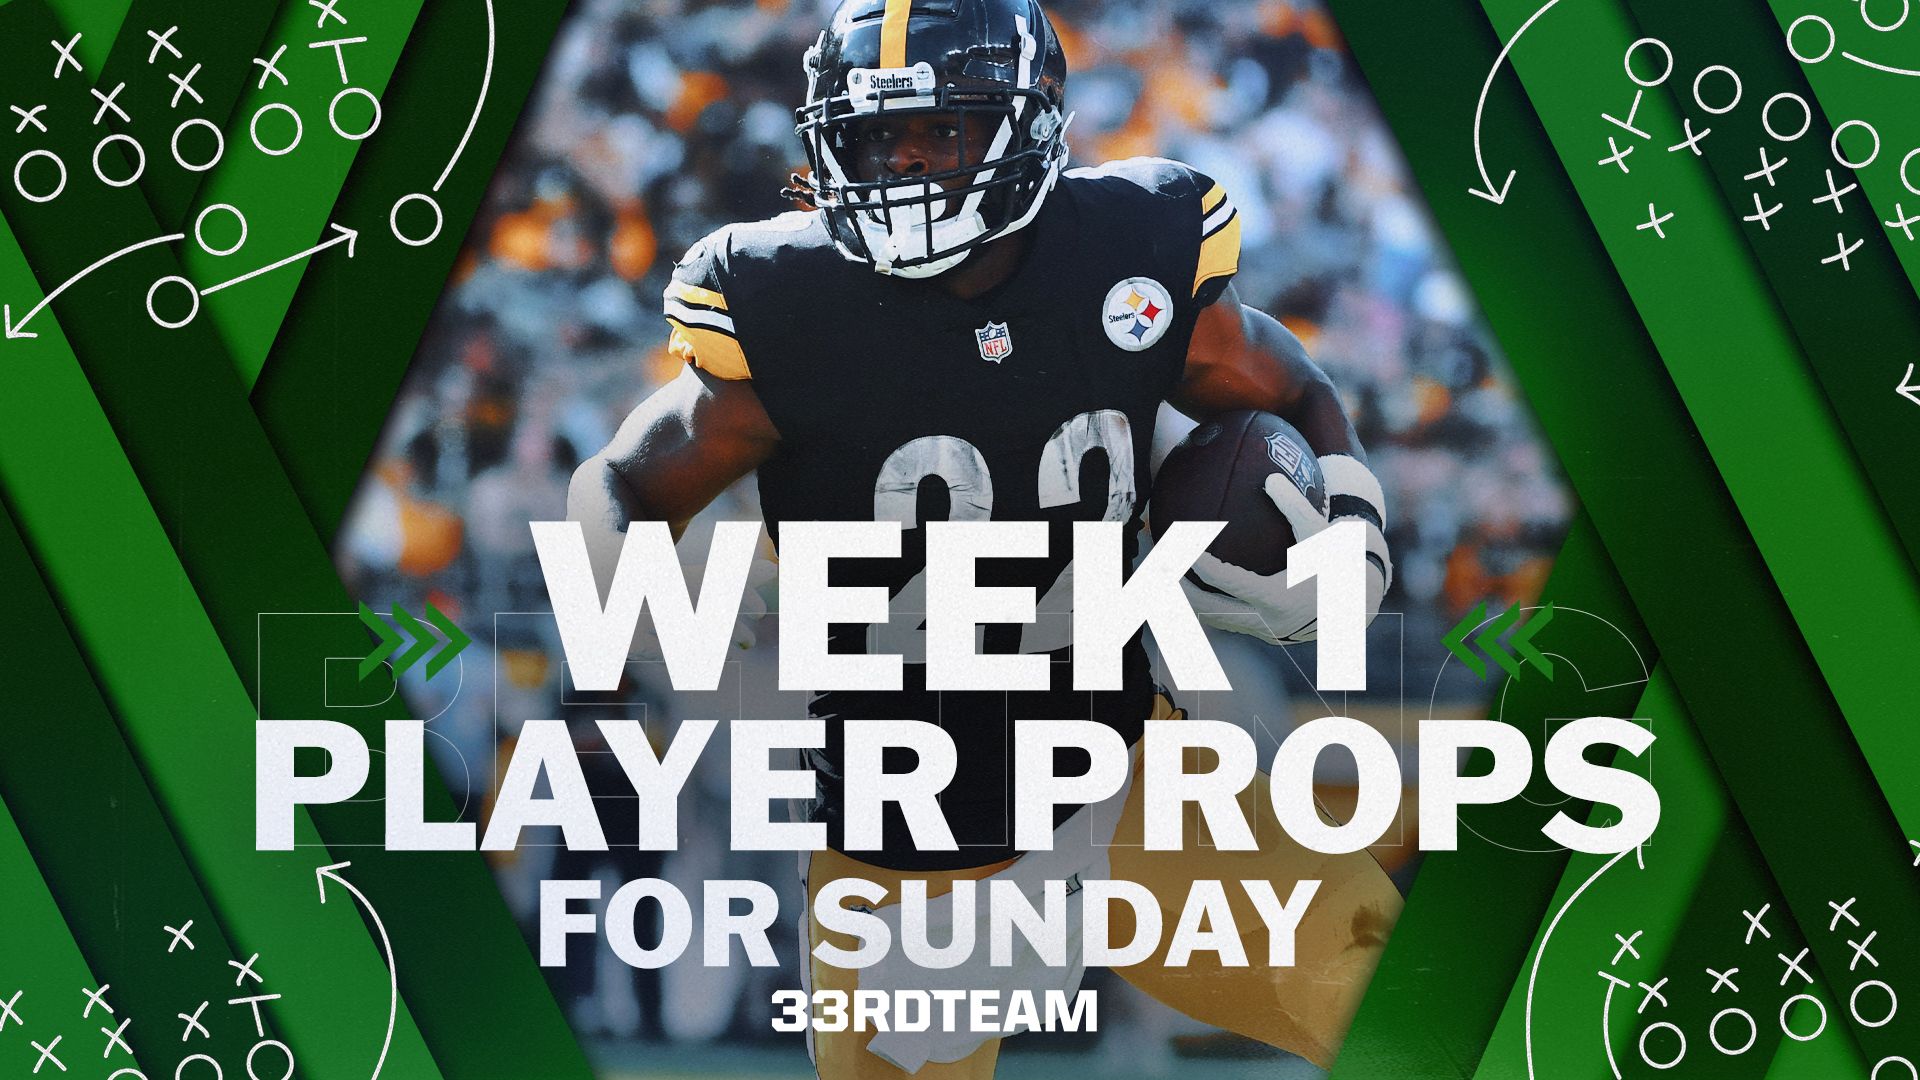 Week 1 Player Props for Sunday